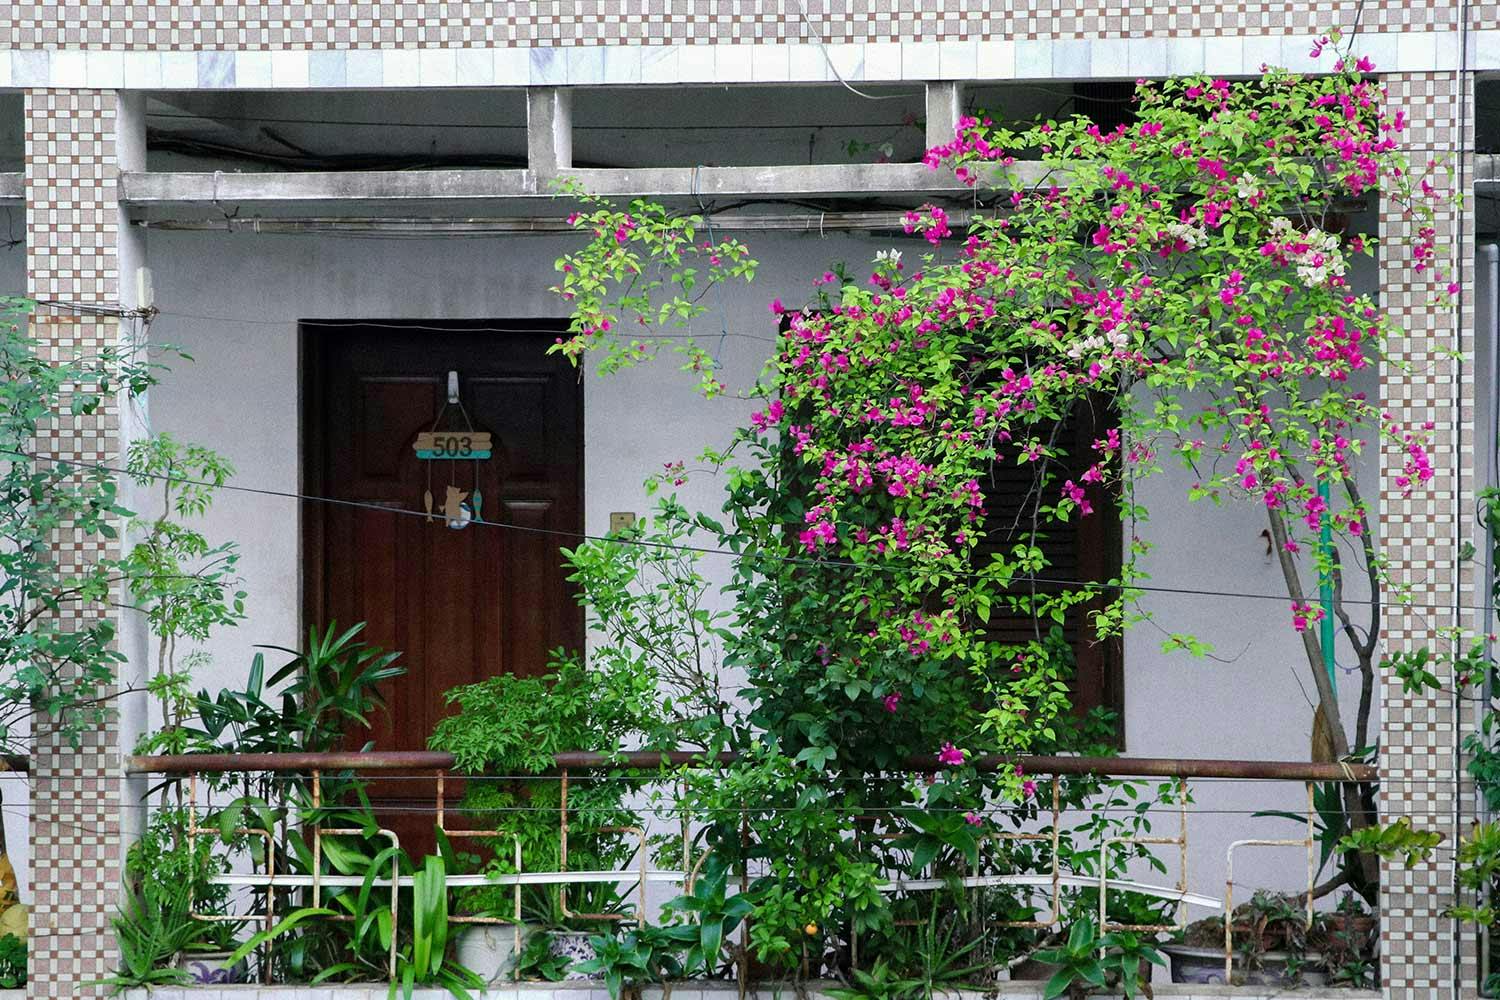 A vine with bright pink flowers and small green leaves hangs from the balcony of an apartment building in Hanoi, Vietnam.